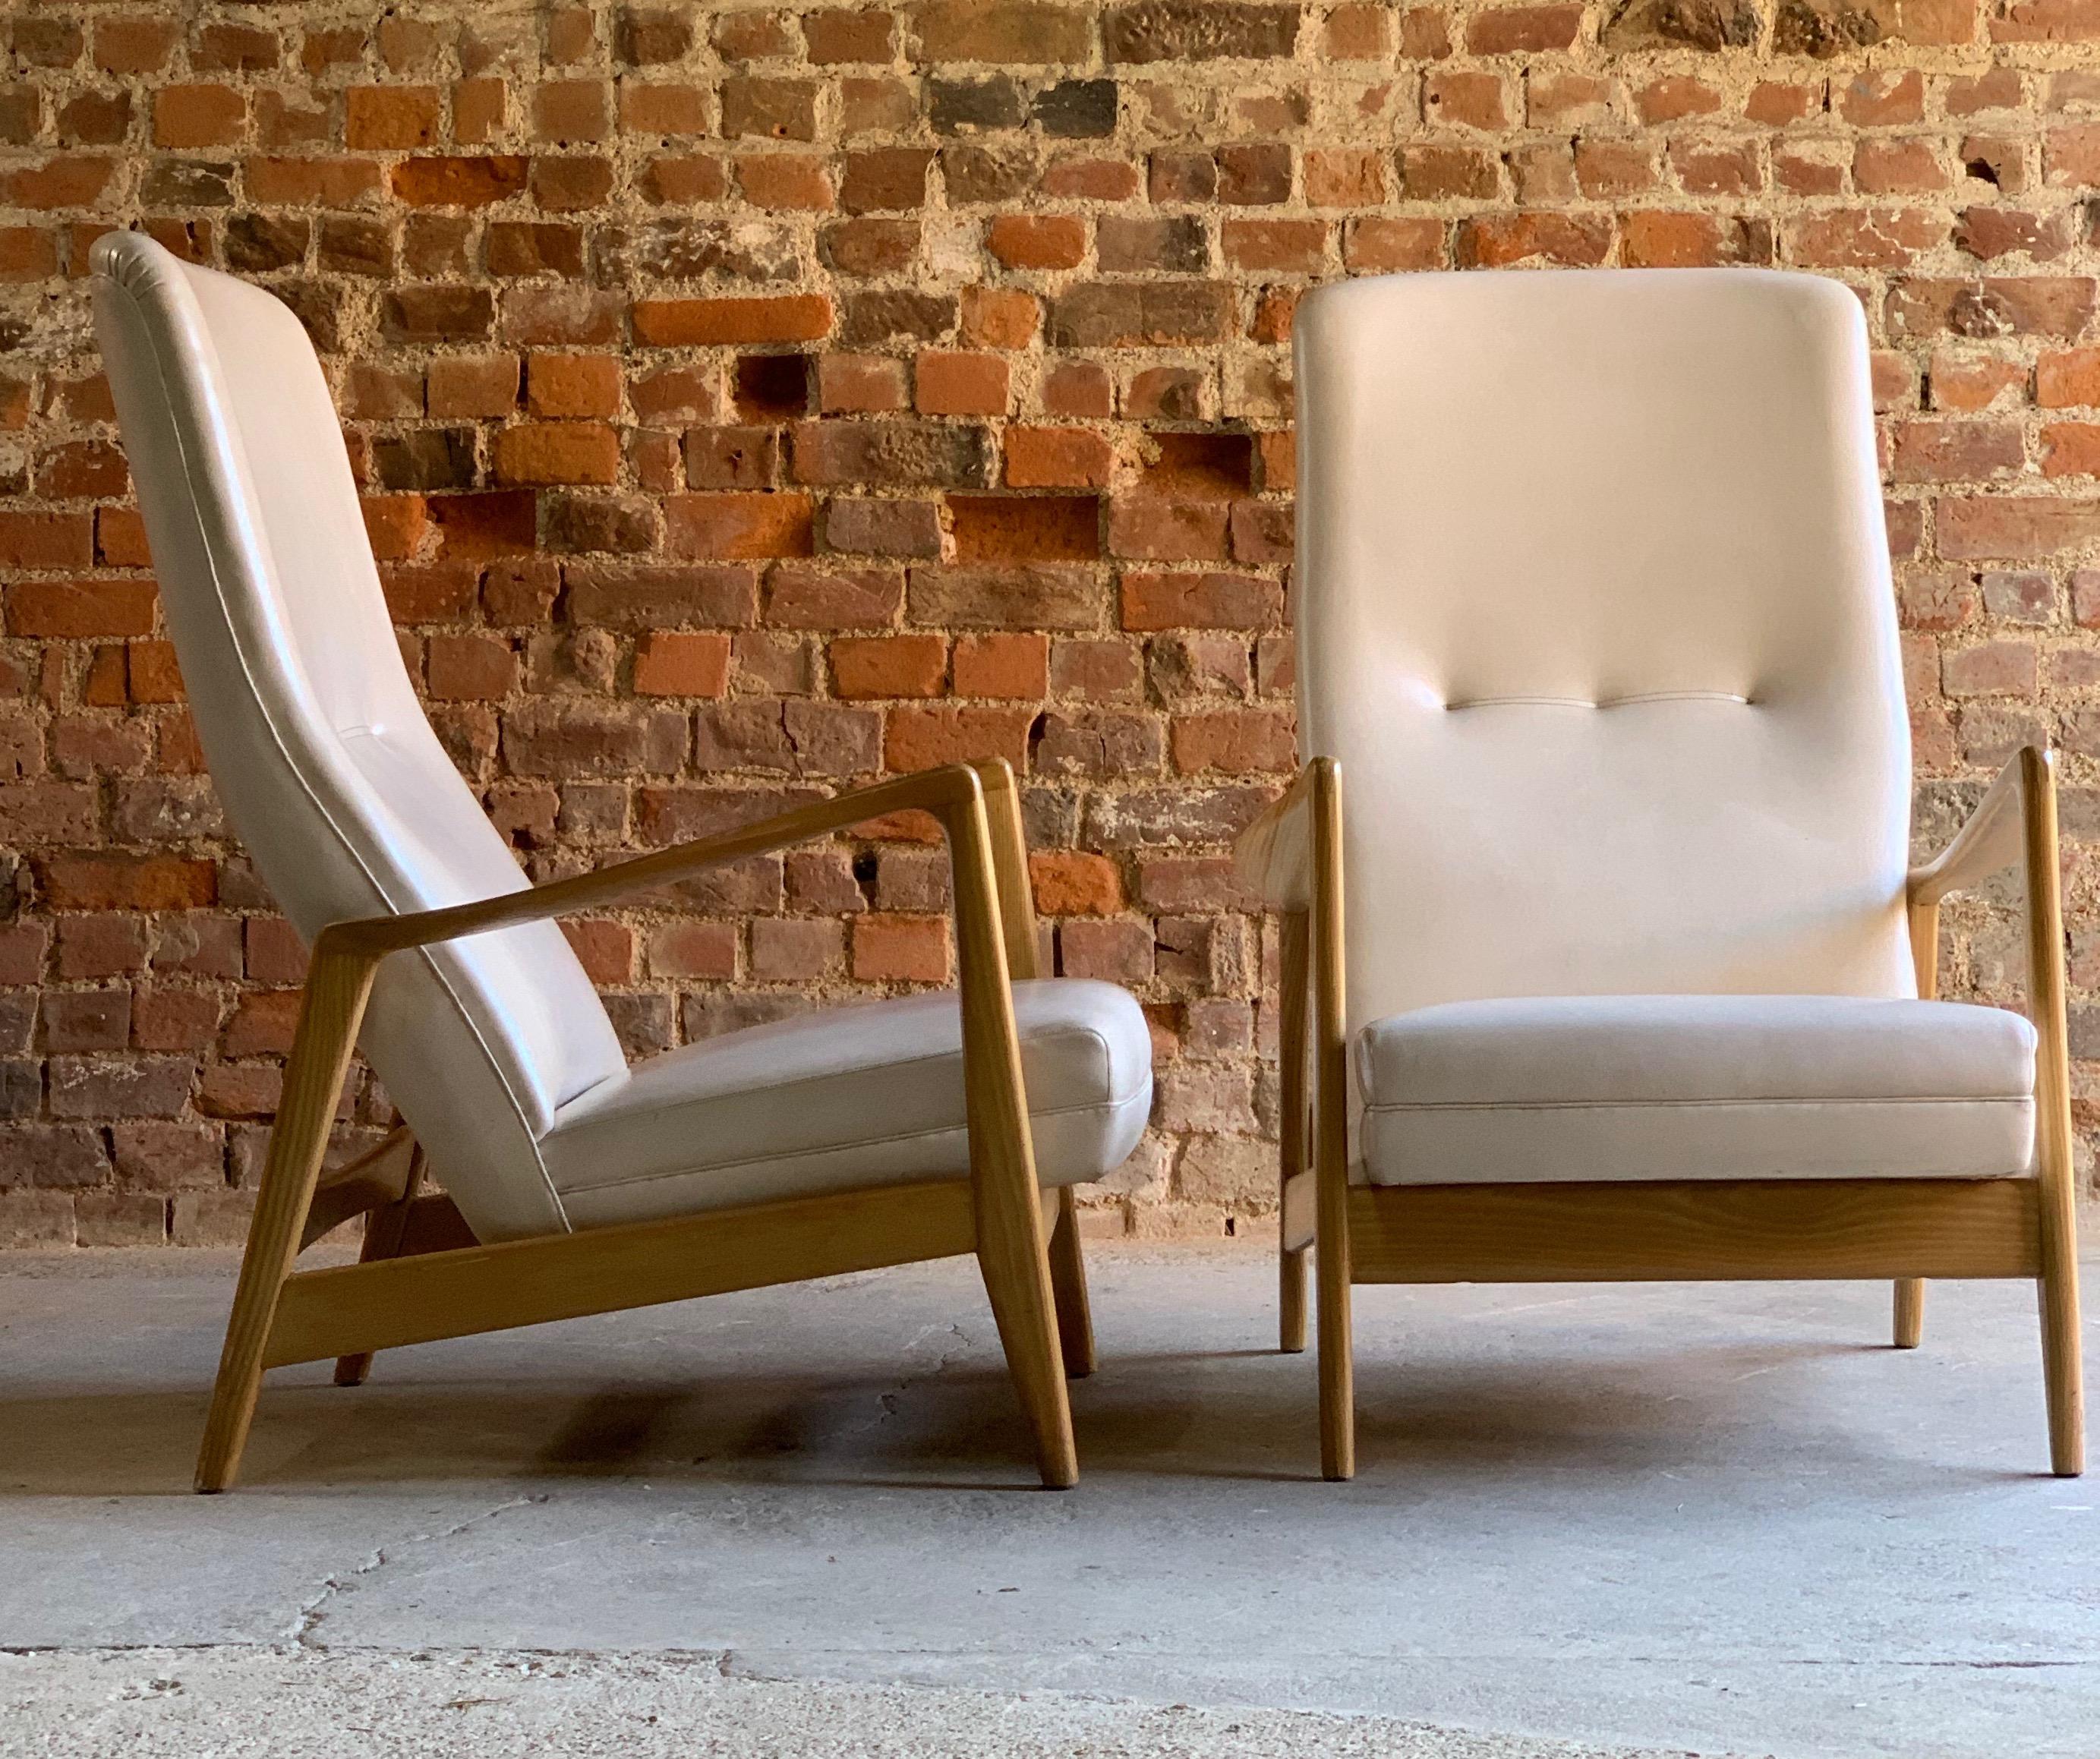 Gio Ponti pair of ash lounge chairs by Cassina Italy circa 1958 for Hotel Parco dei Principe

Gio Ponti pair of ash lounge chairs by Cassina Italy circa 1958, manufactured for the Hotel Parco dei Principe, Sorrento, Italy, The elegant sweeping